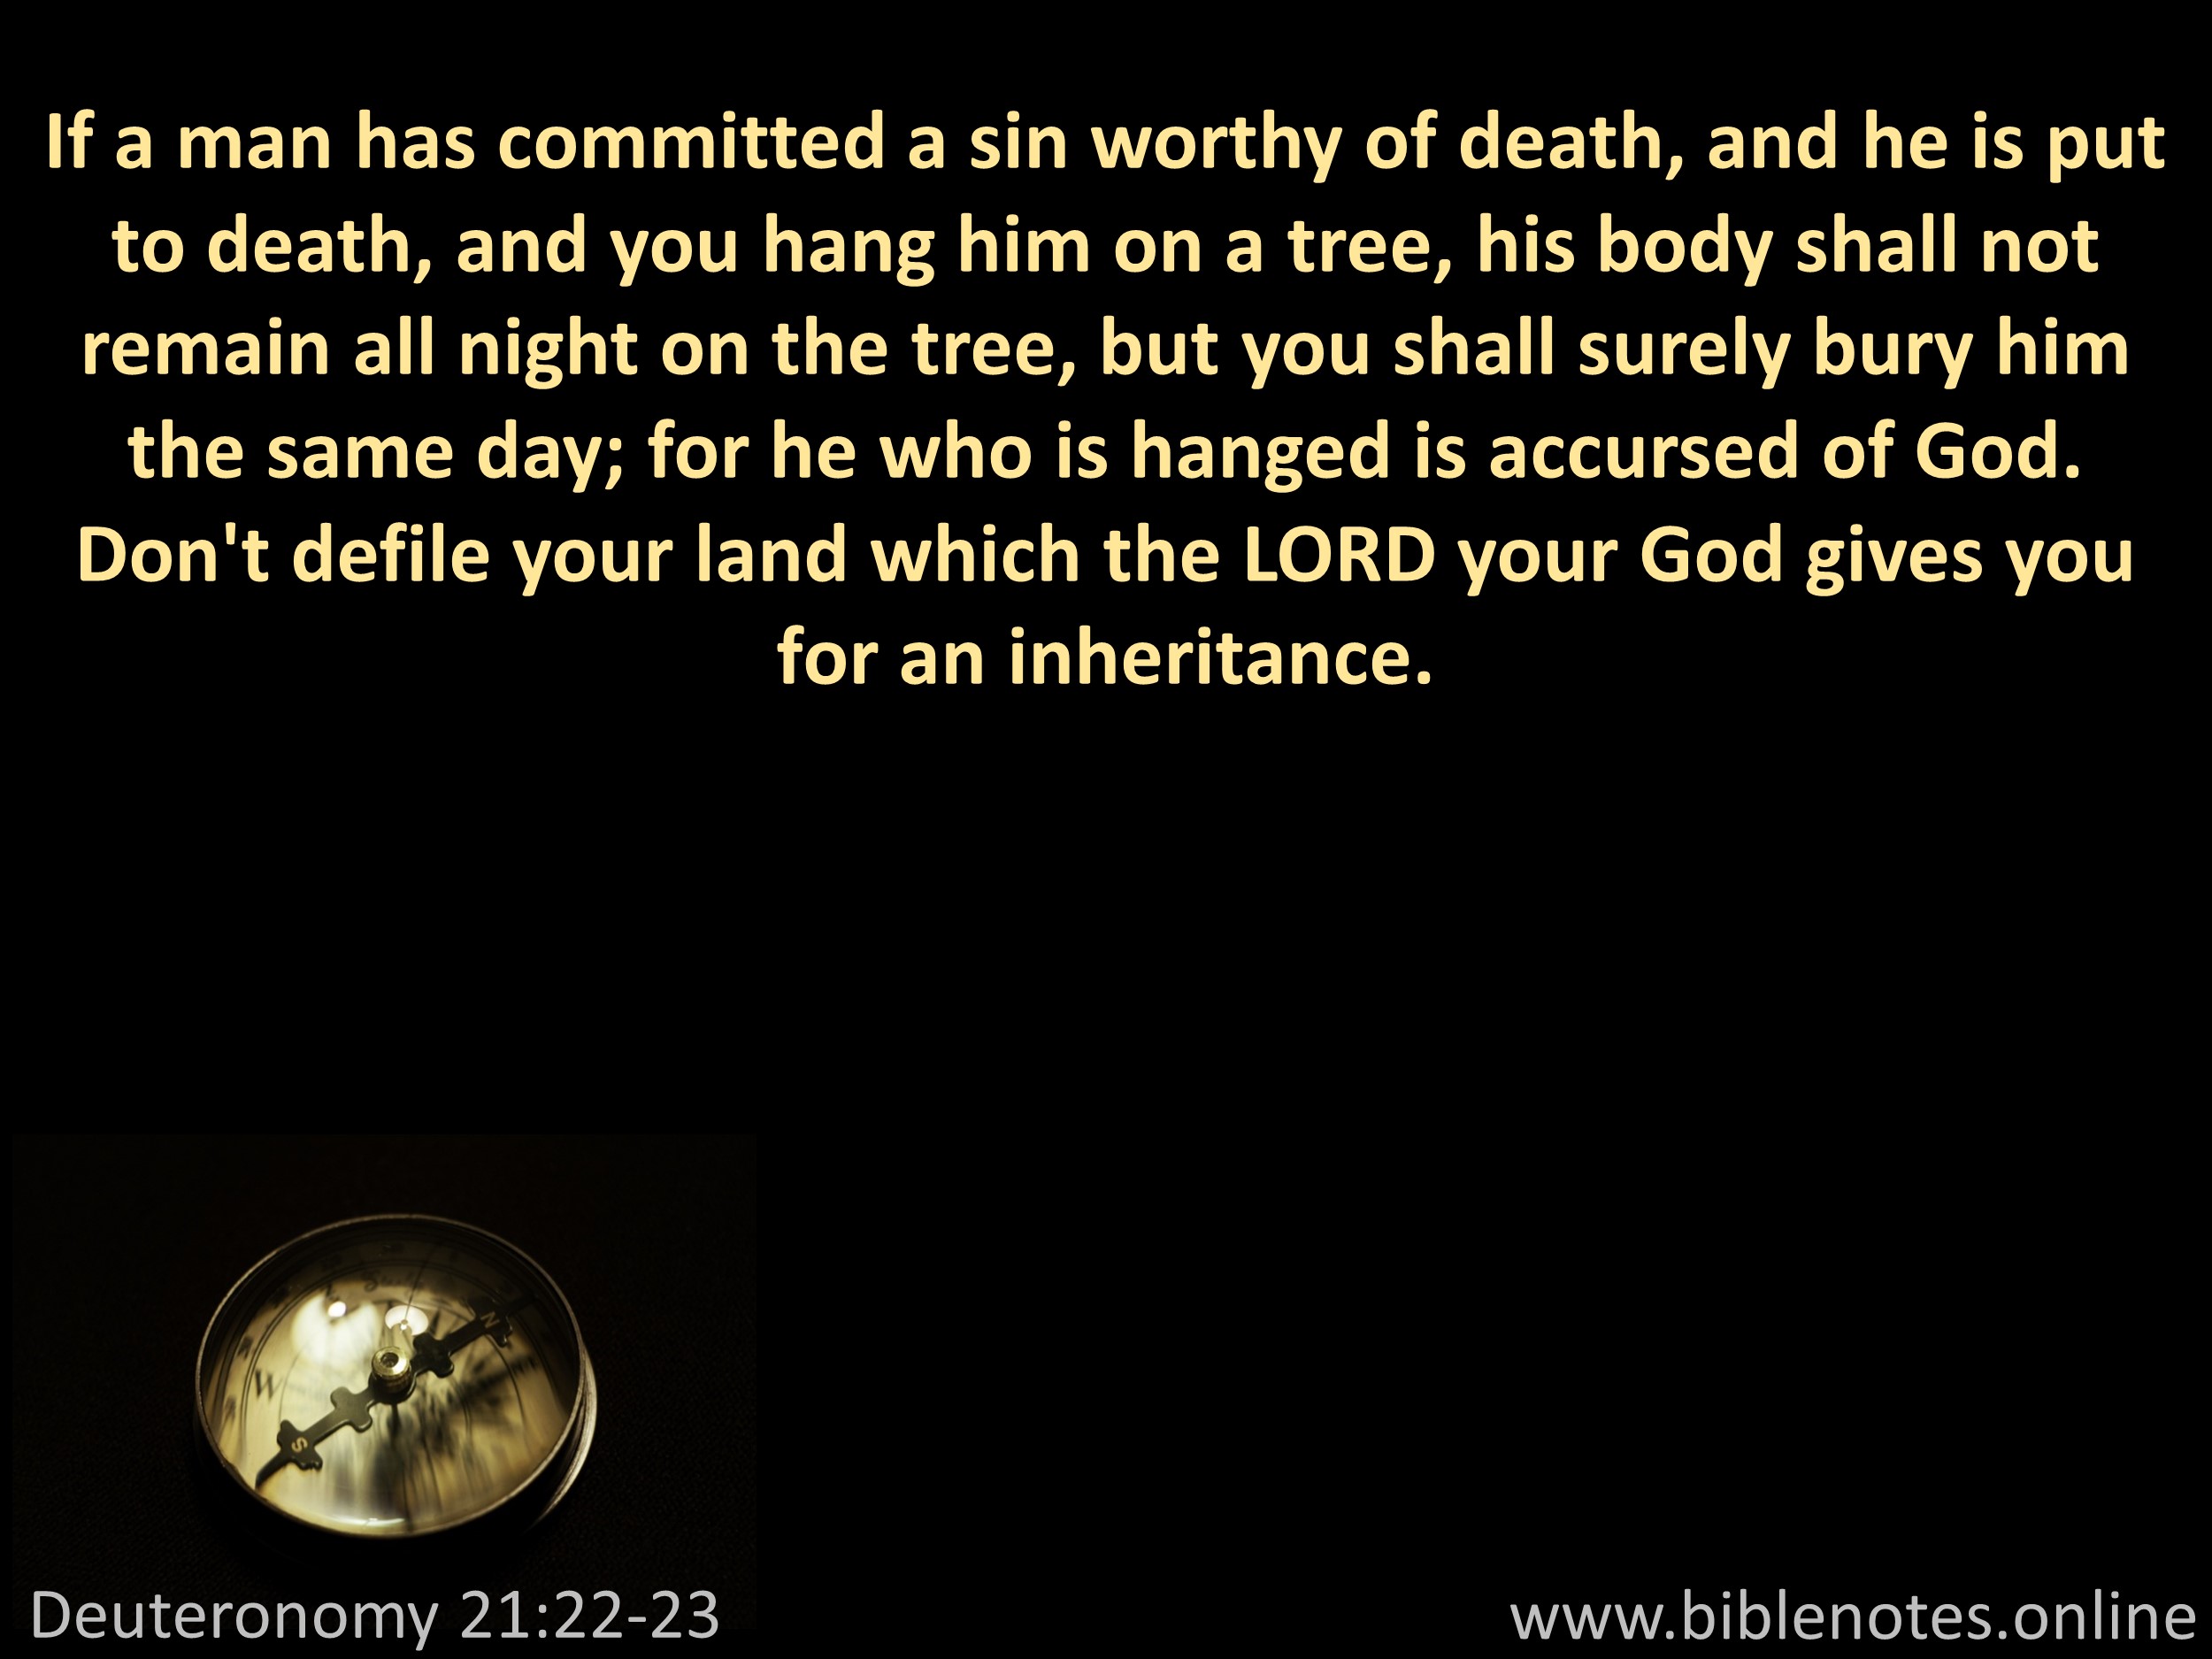 Bible Verse from Deuteronomy Chapter 21